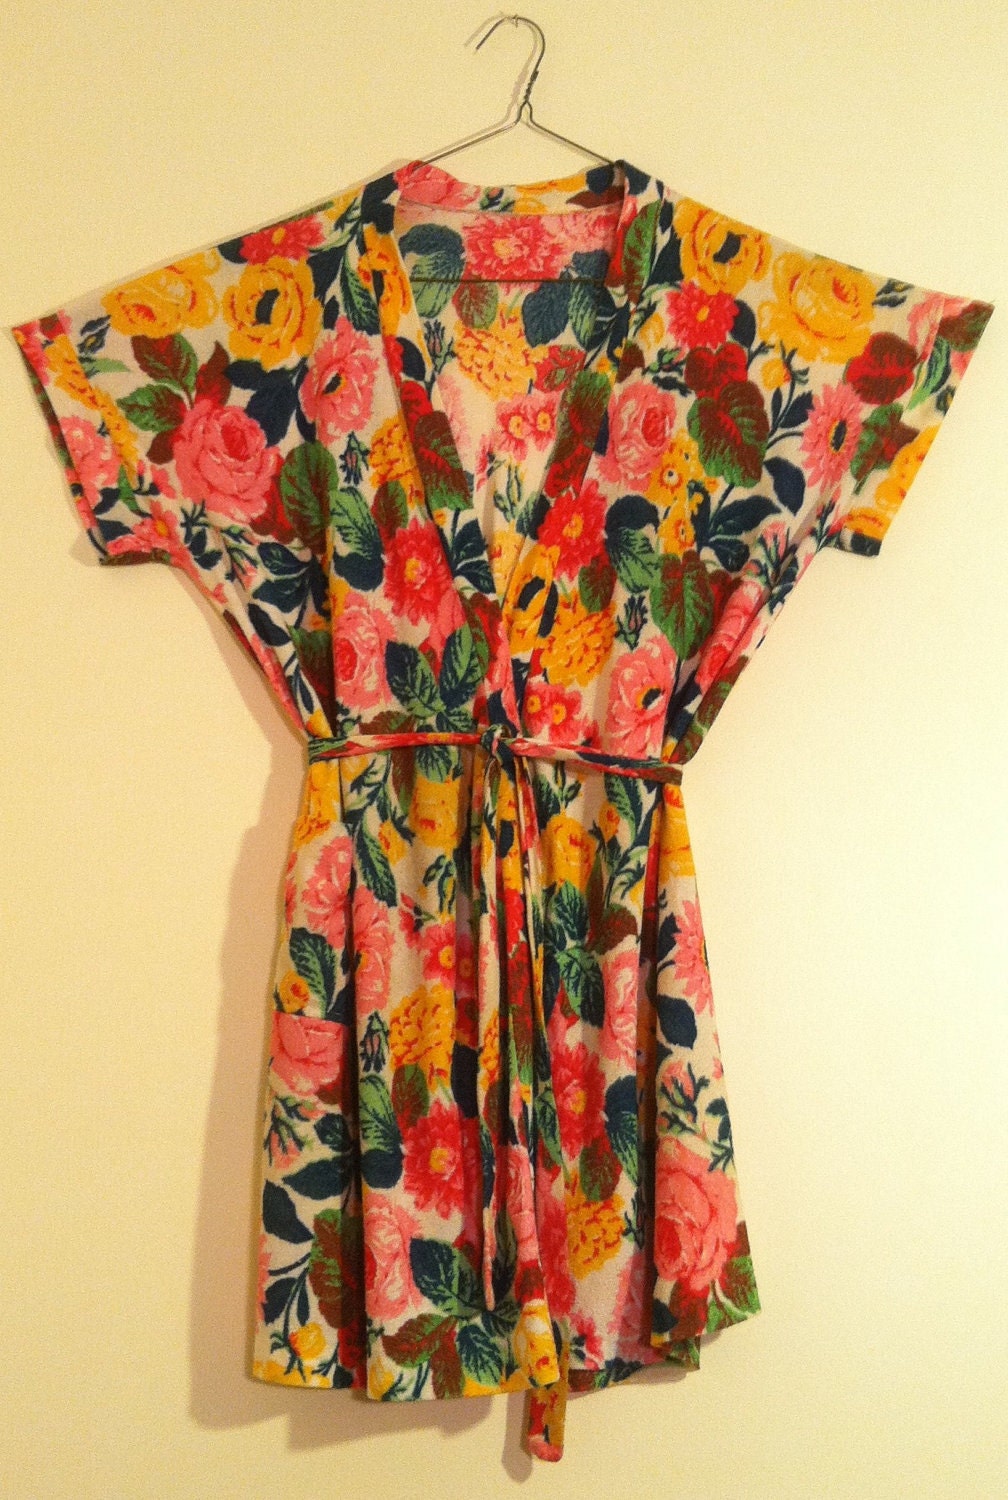 Bright Floral Terry Cloth Robe 1970's Beach Cover-up S/M